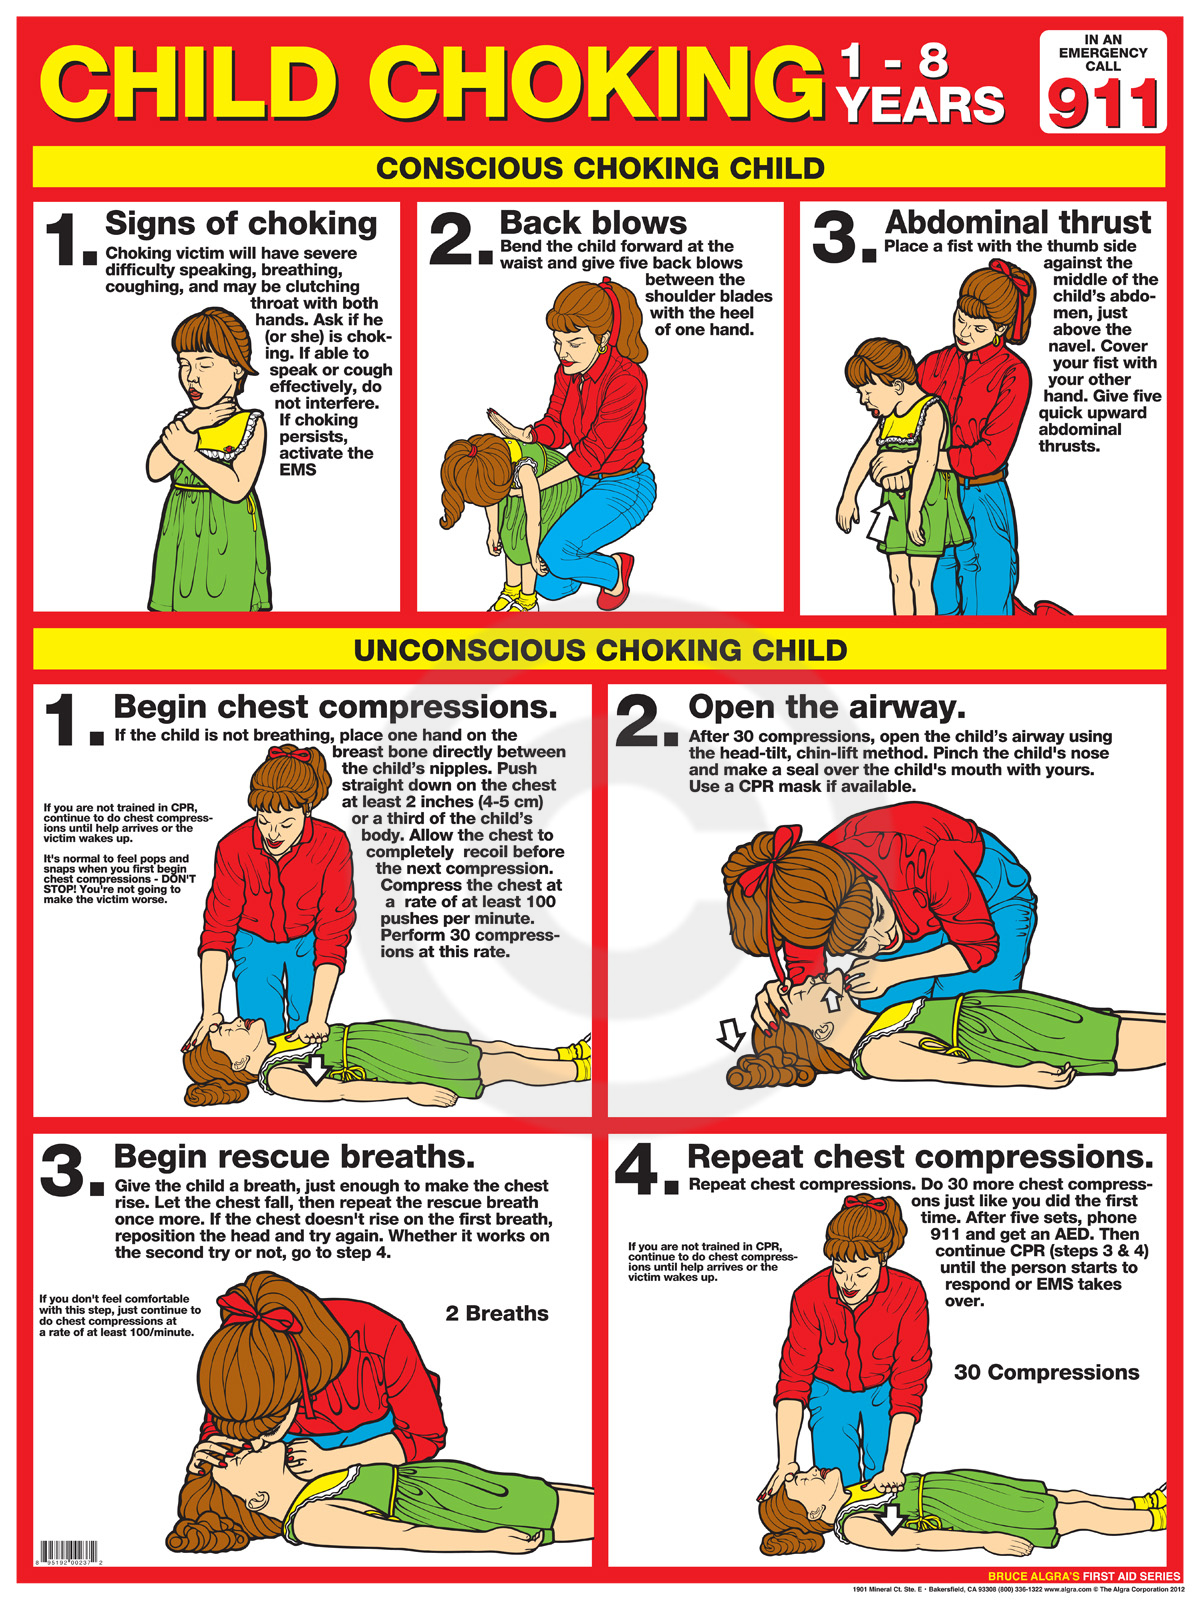 6-best-images-of-choking-cpr-printable-first-aid-choking-child-first